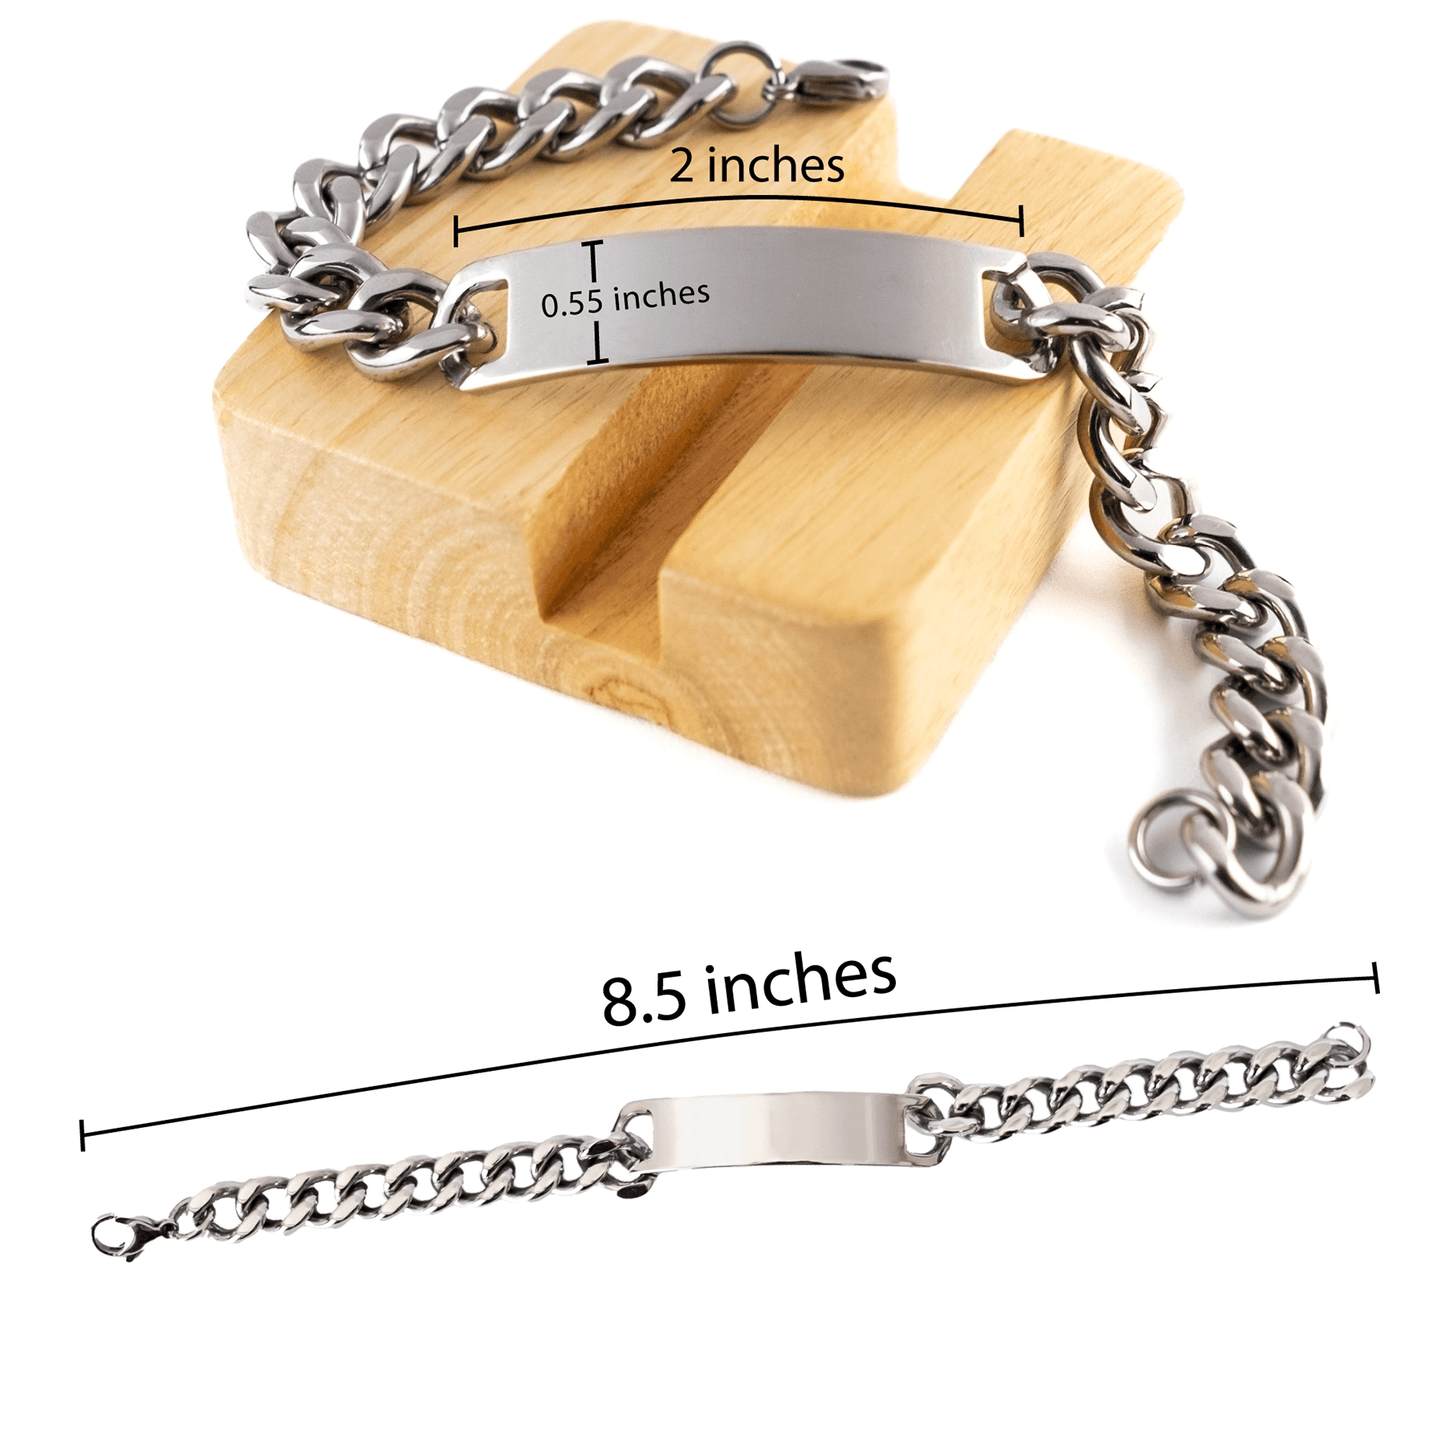 Remarkable Logger Gifts, Your dedication and hard work, Inspirational Birthday Christmas Unique Cuban Chain Stainless Steel Bracelet For Logger, Coworkers, Men, Women, Friends - Mallard Moon Gift Shop